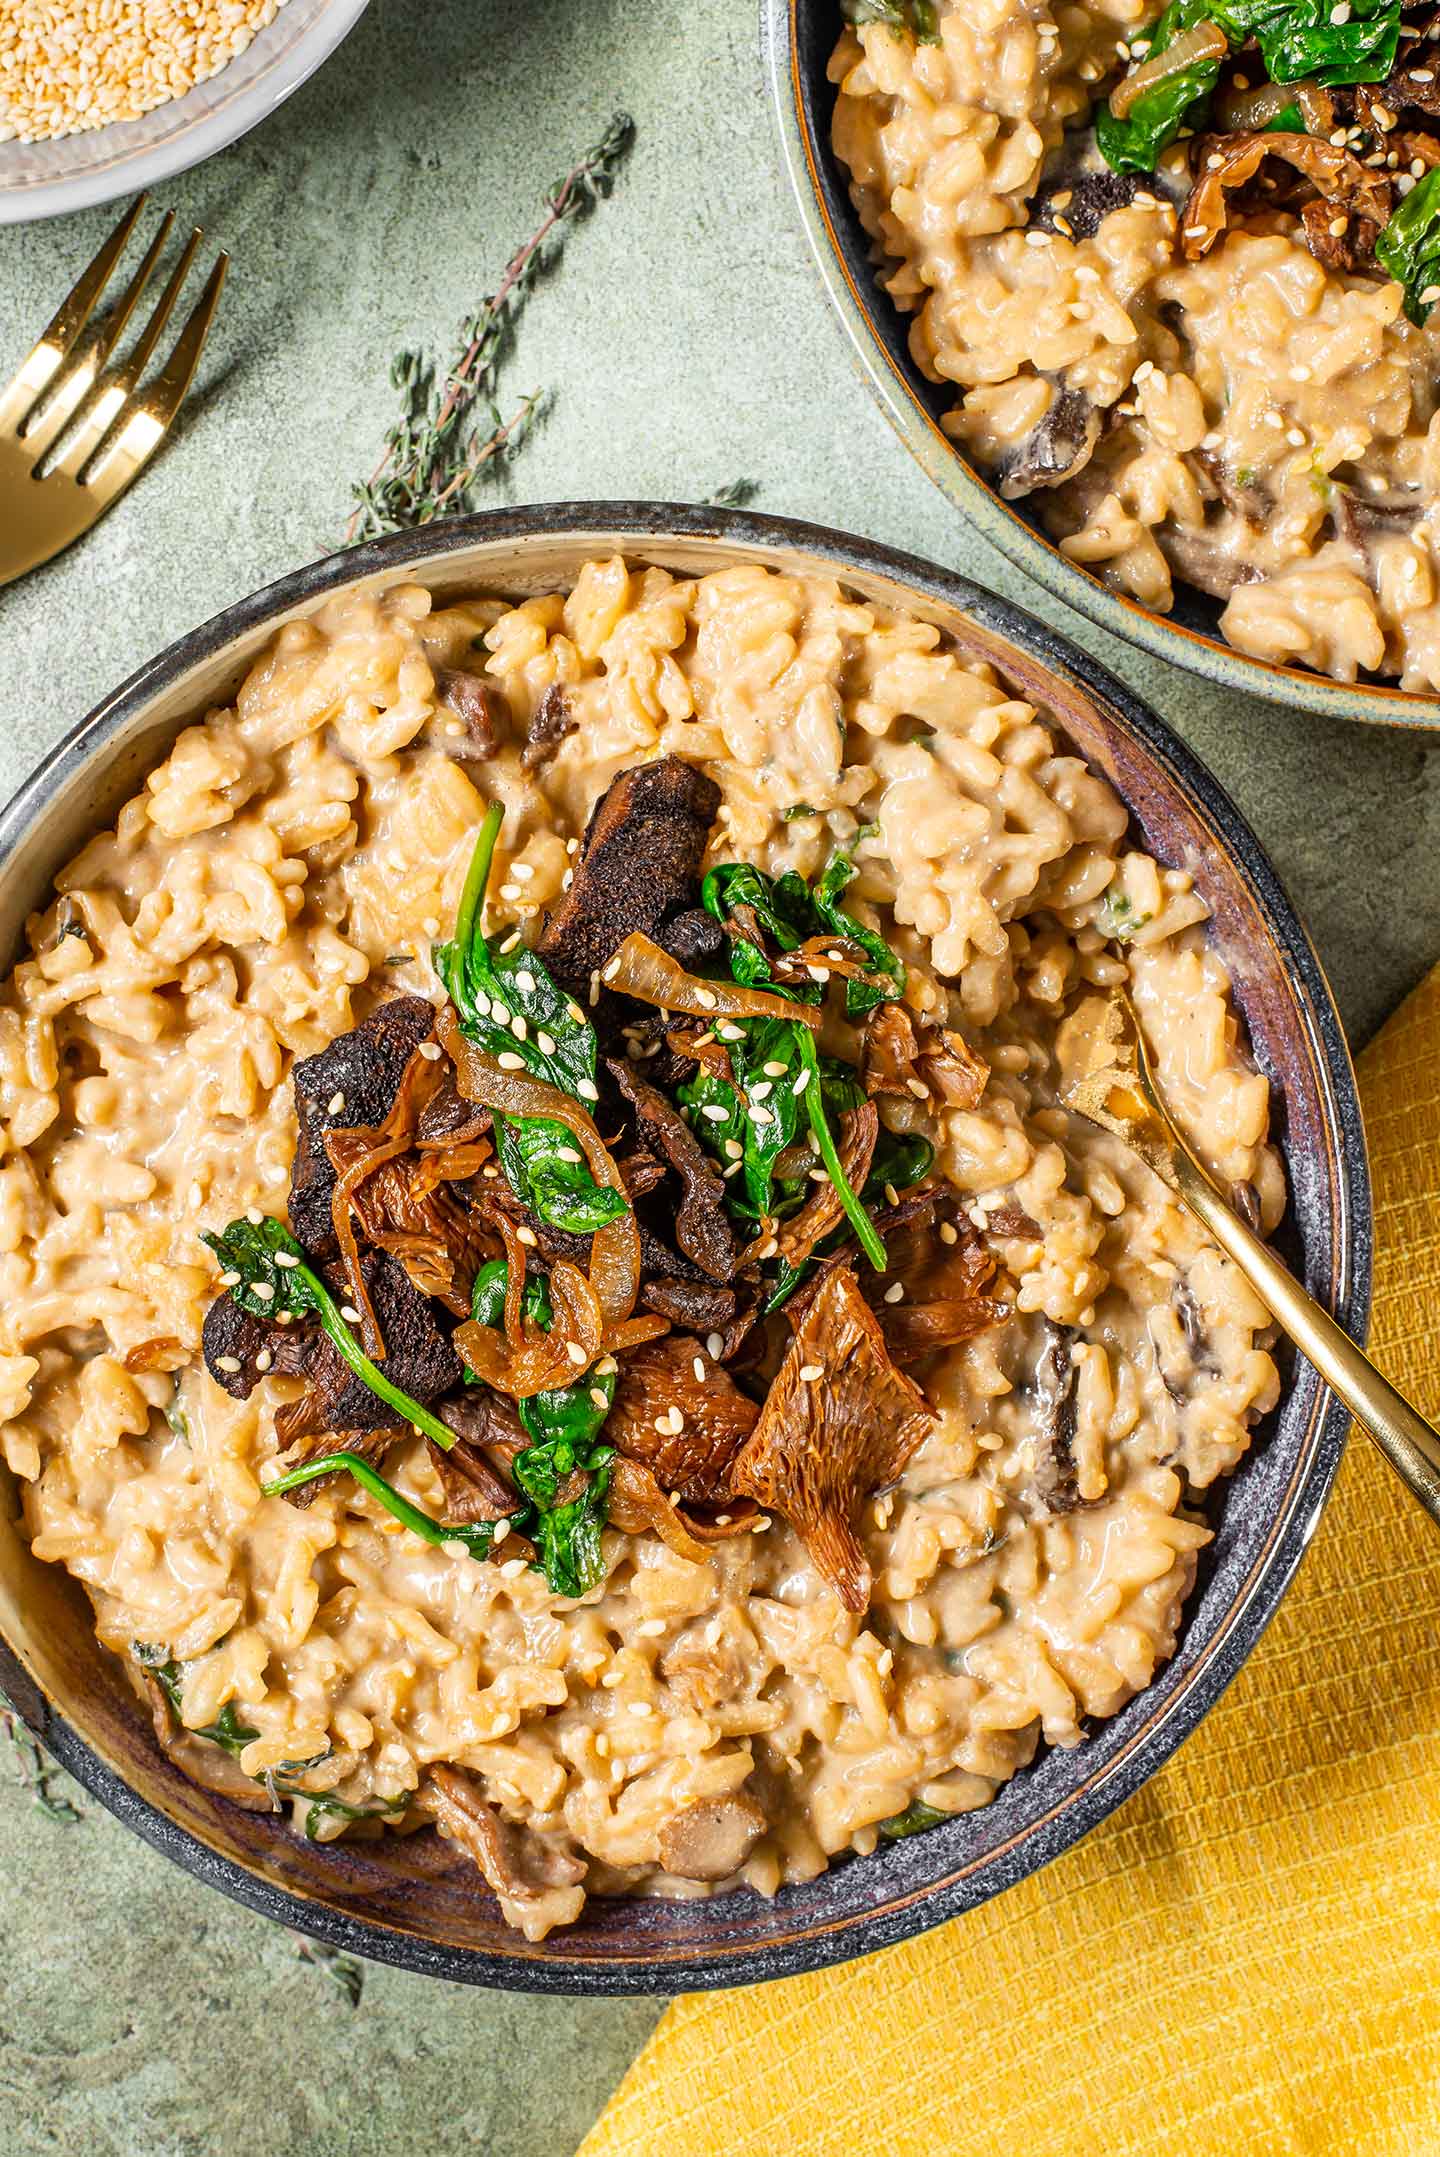 Top down view of two dishes of vegan mushroom risotto. The texture is creamy and the mushroom topping is a beautiful garnish.